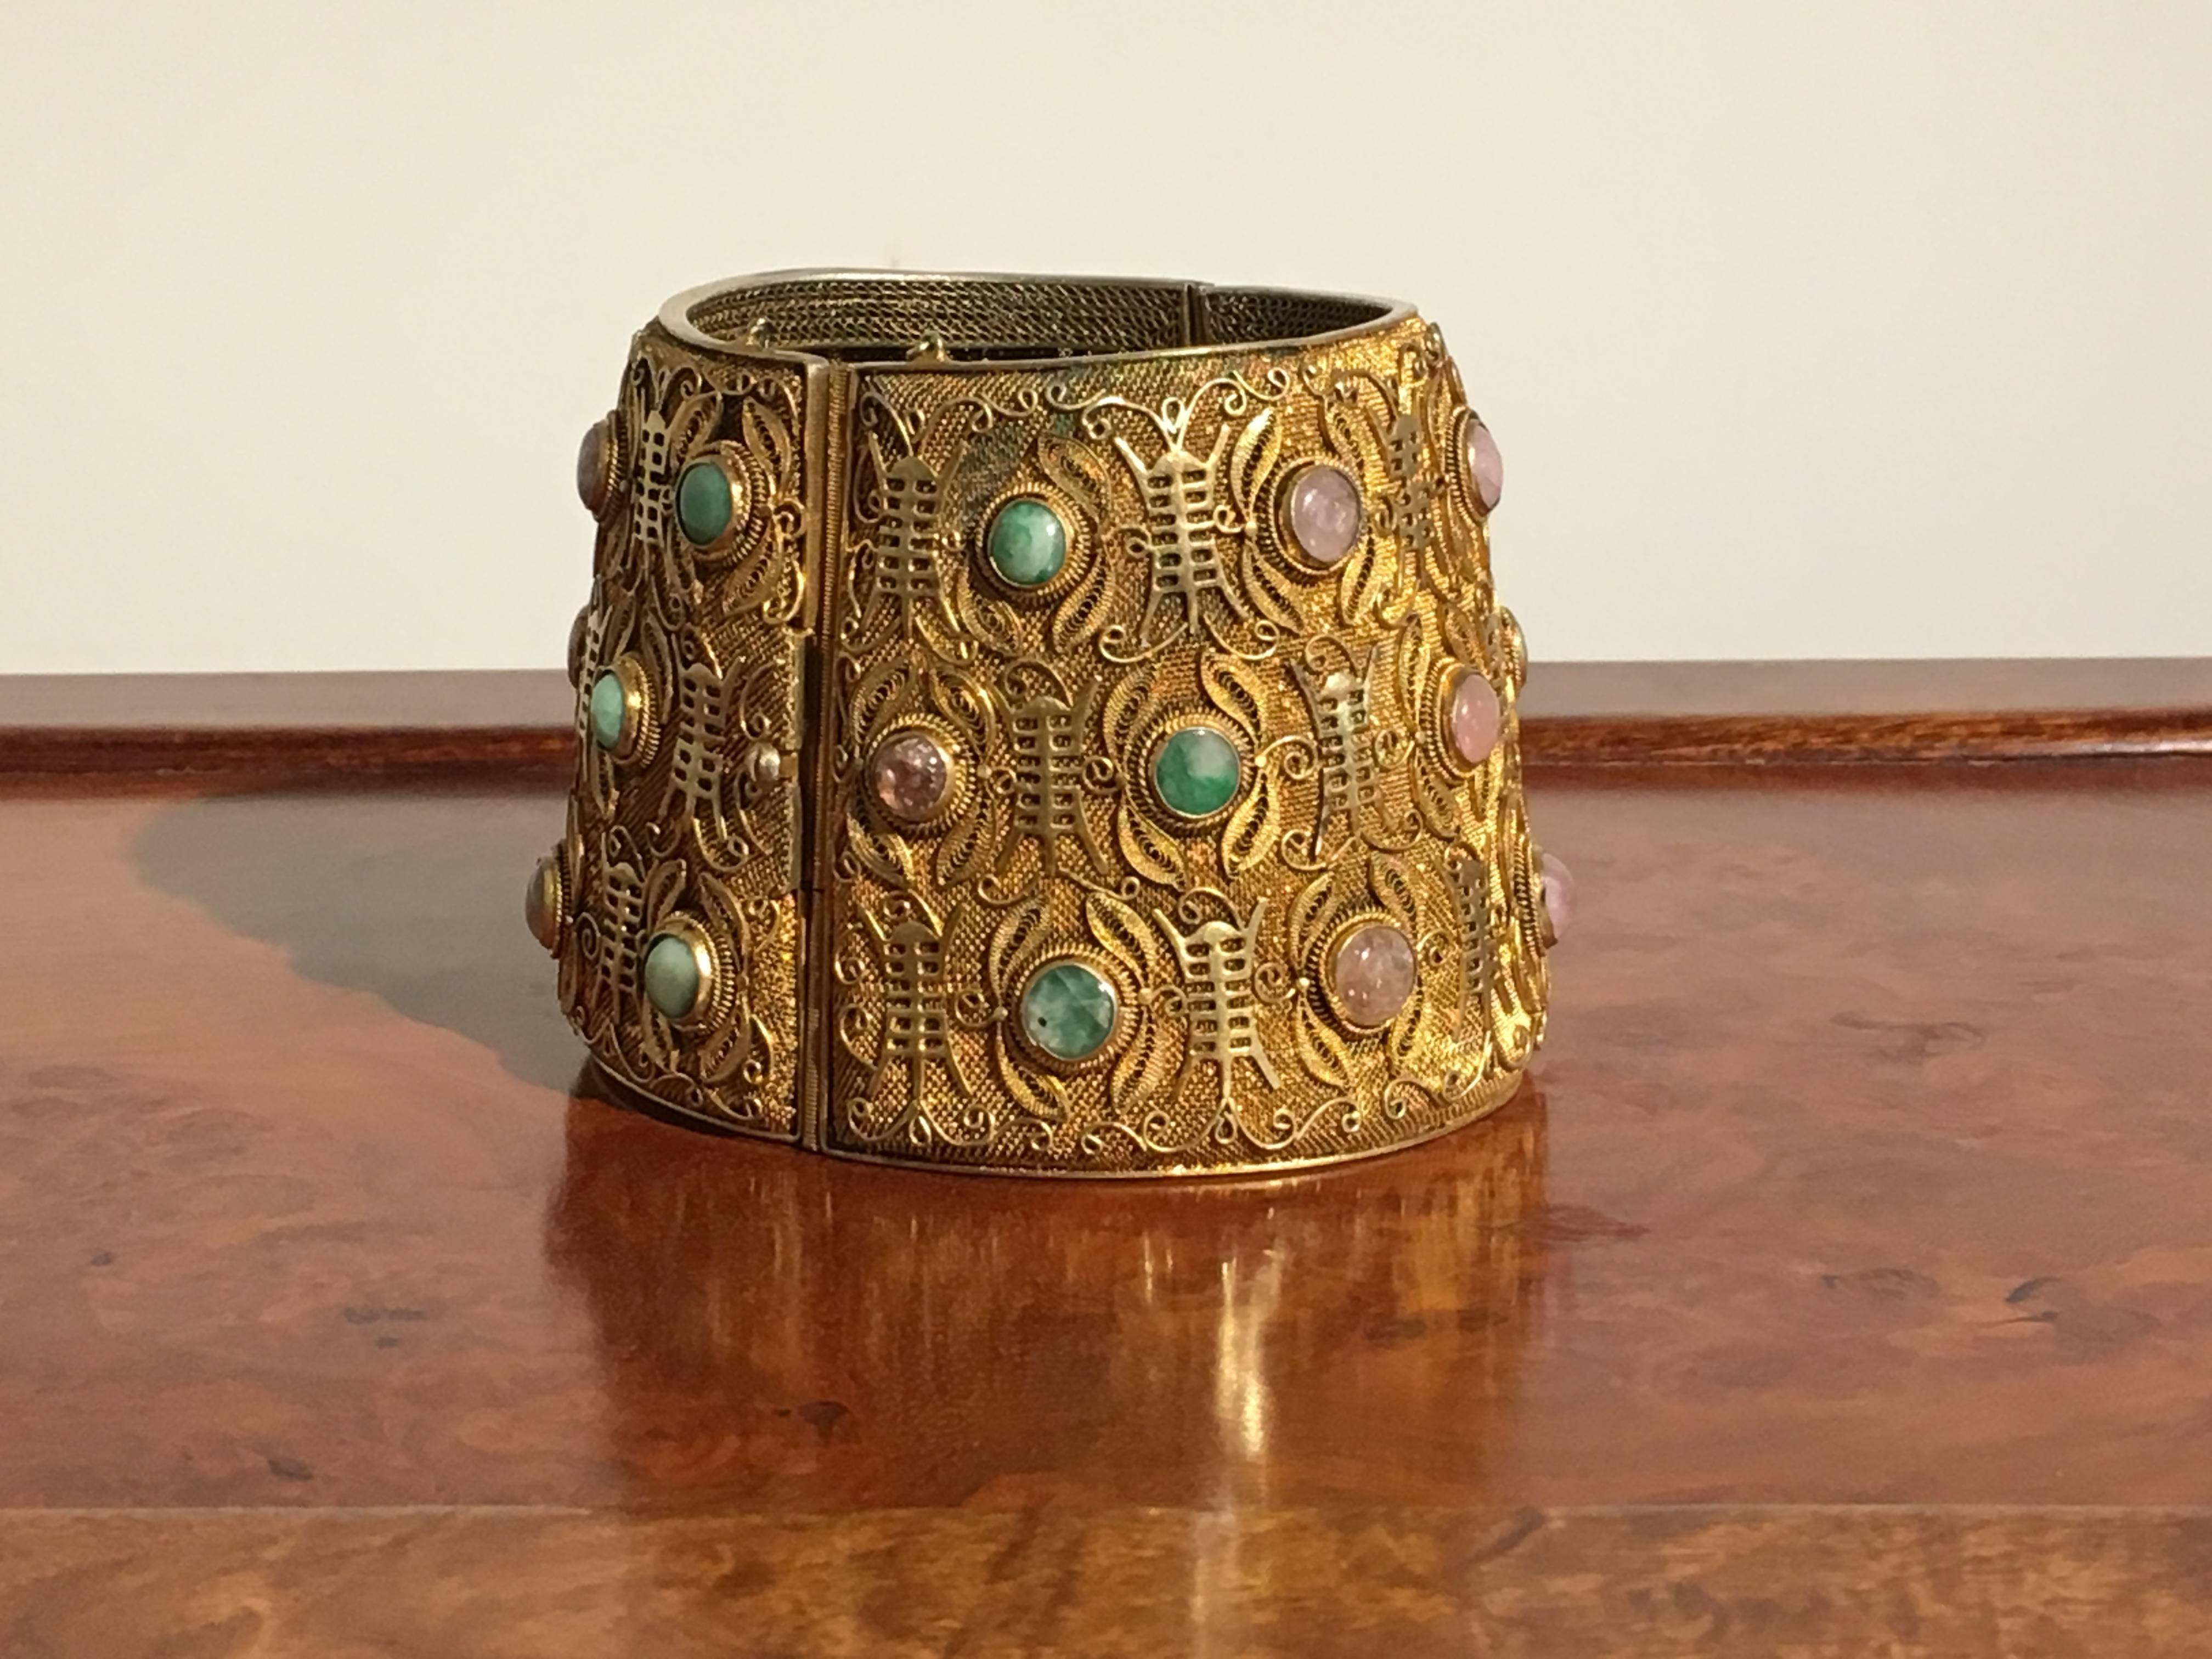 A large and stunning Chinese export vermeil cuff set with jade and tourmaline. The cuff of finely worked woven gilt silver, with a stylized butterfly design throughout. The bodies of the butterflies designed as "shou" (longevity)